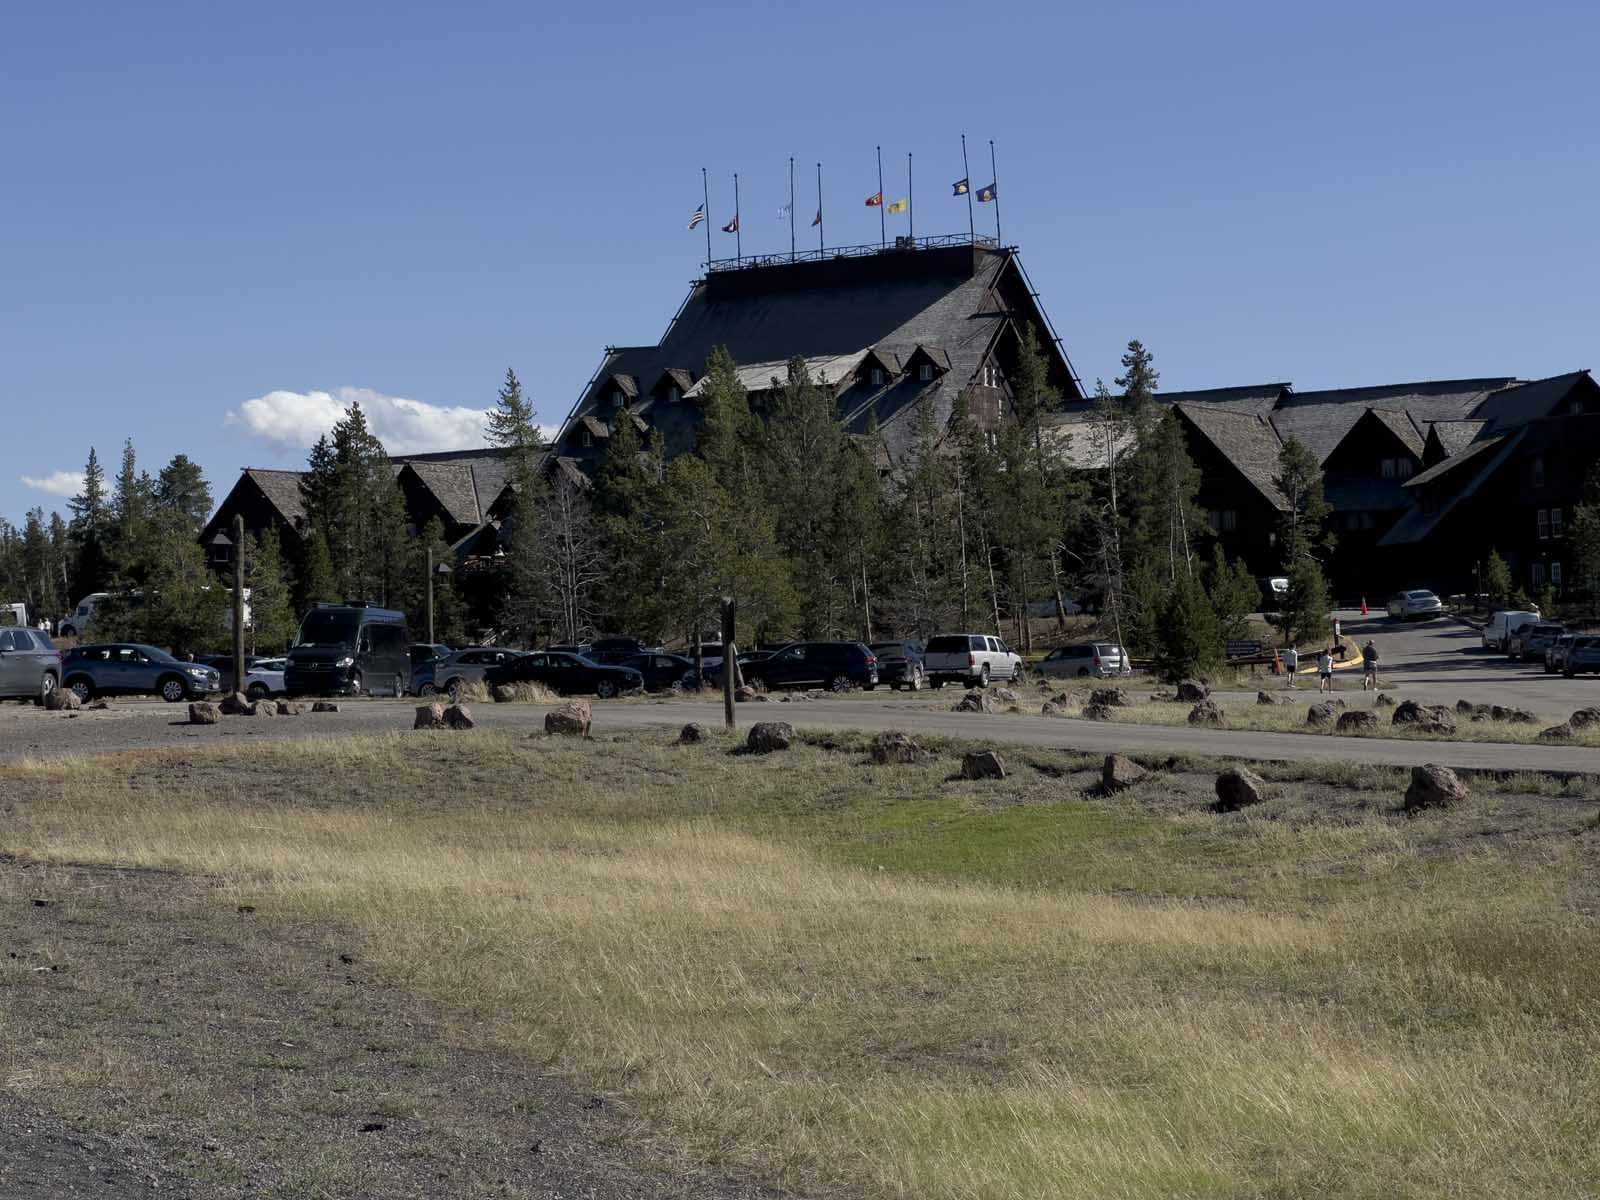 Yellowstone Park Lodging Facilities - Enjoy Your Parks